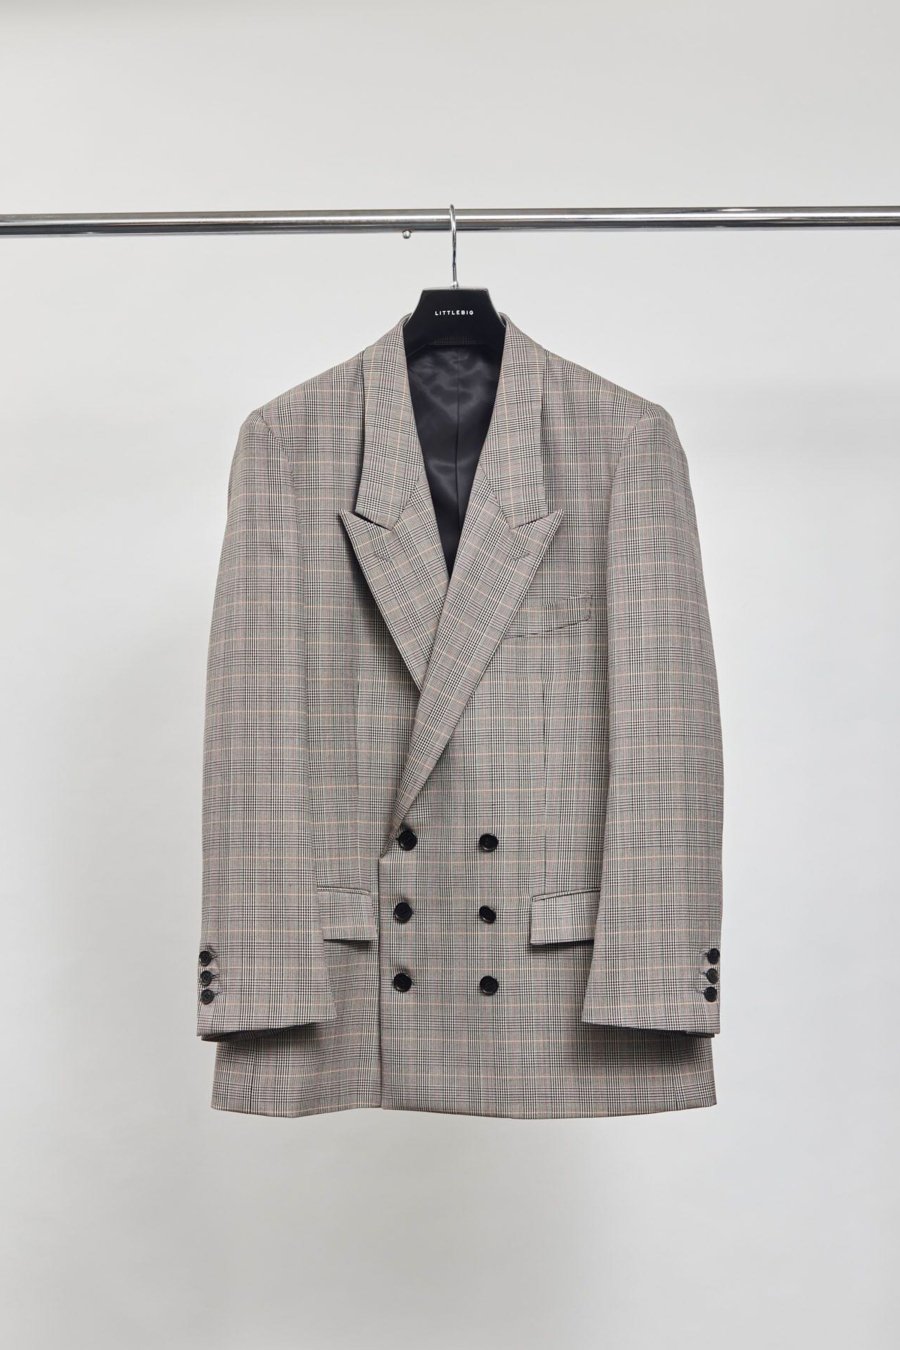 LITTLEBIG  Check Double Jacket<img class='new_mark_img2' src='https://img.shop-pro.jp/img/new/icons15.gif' style='border:none;display:inline;margin:0px;padding:0px;width:auto;' />